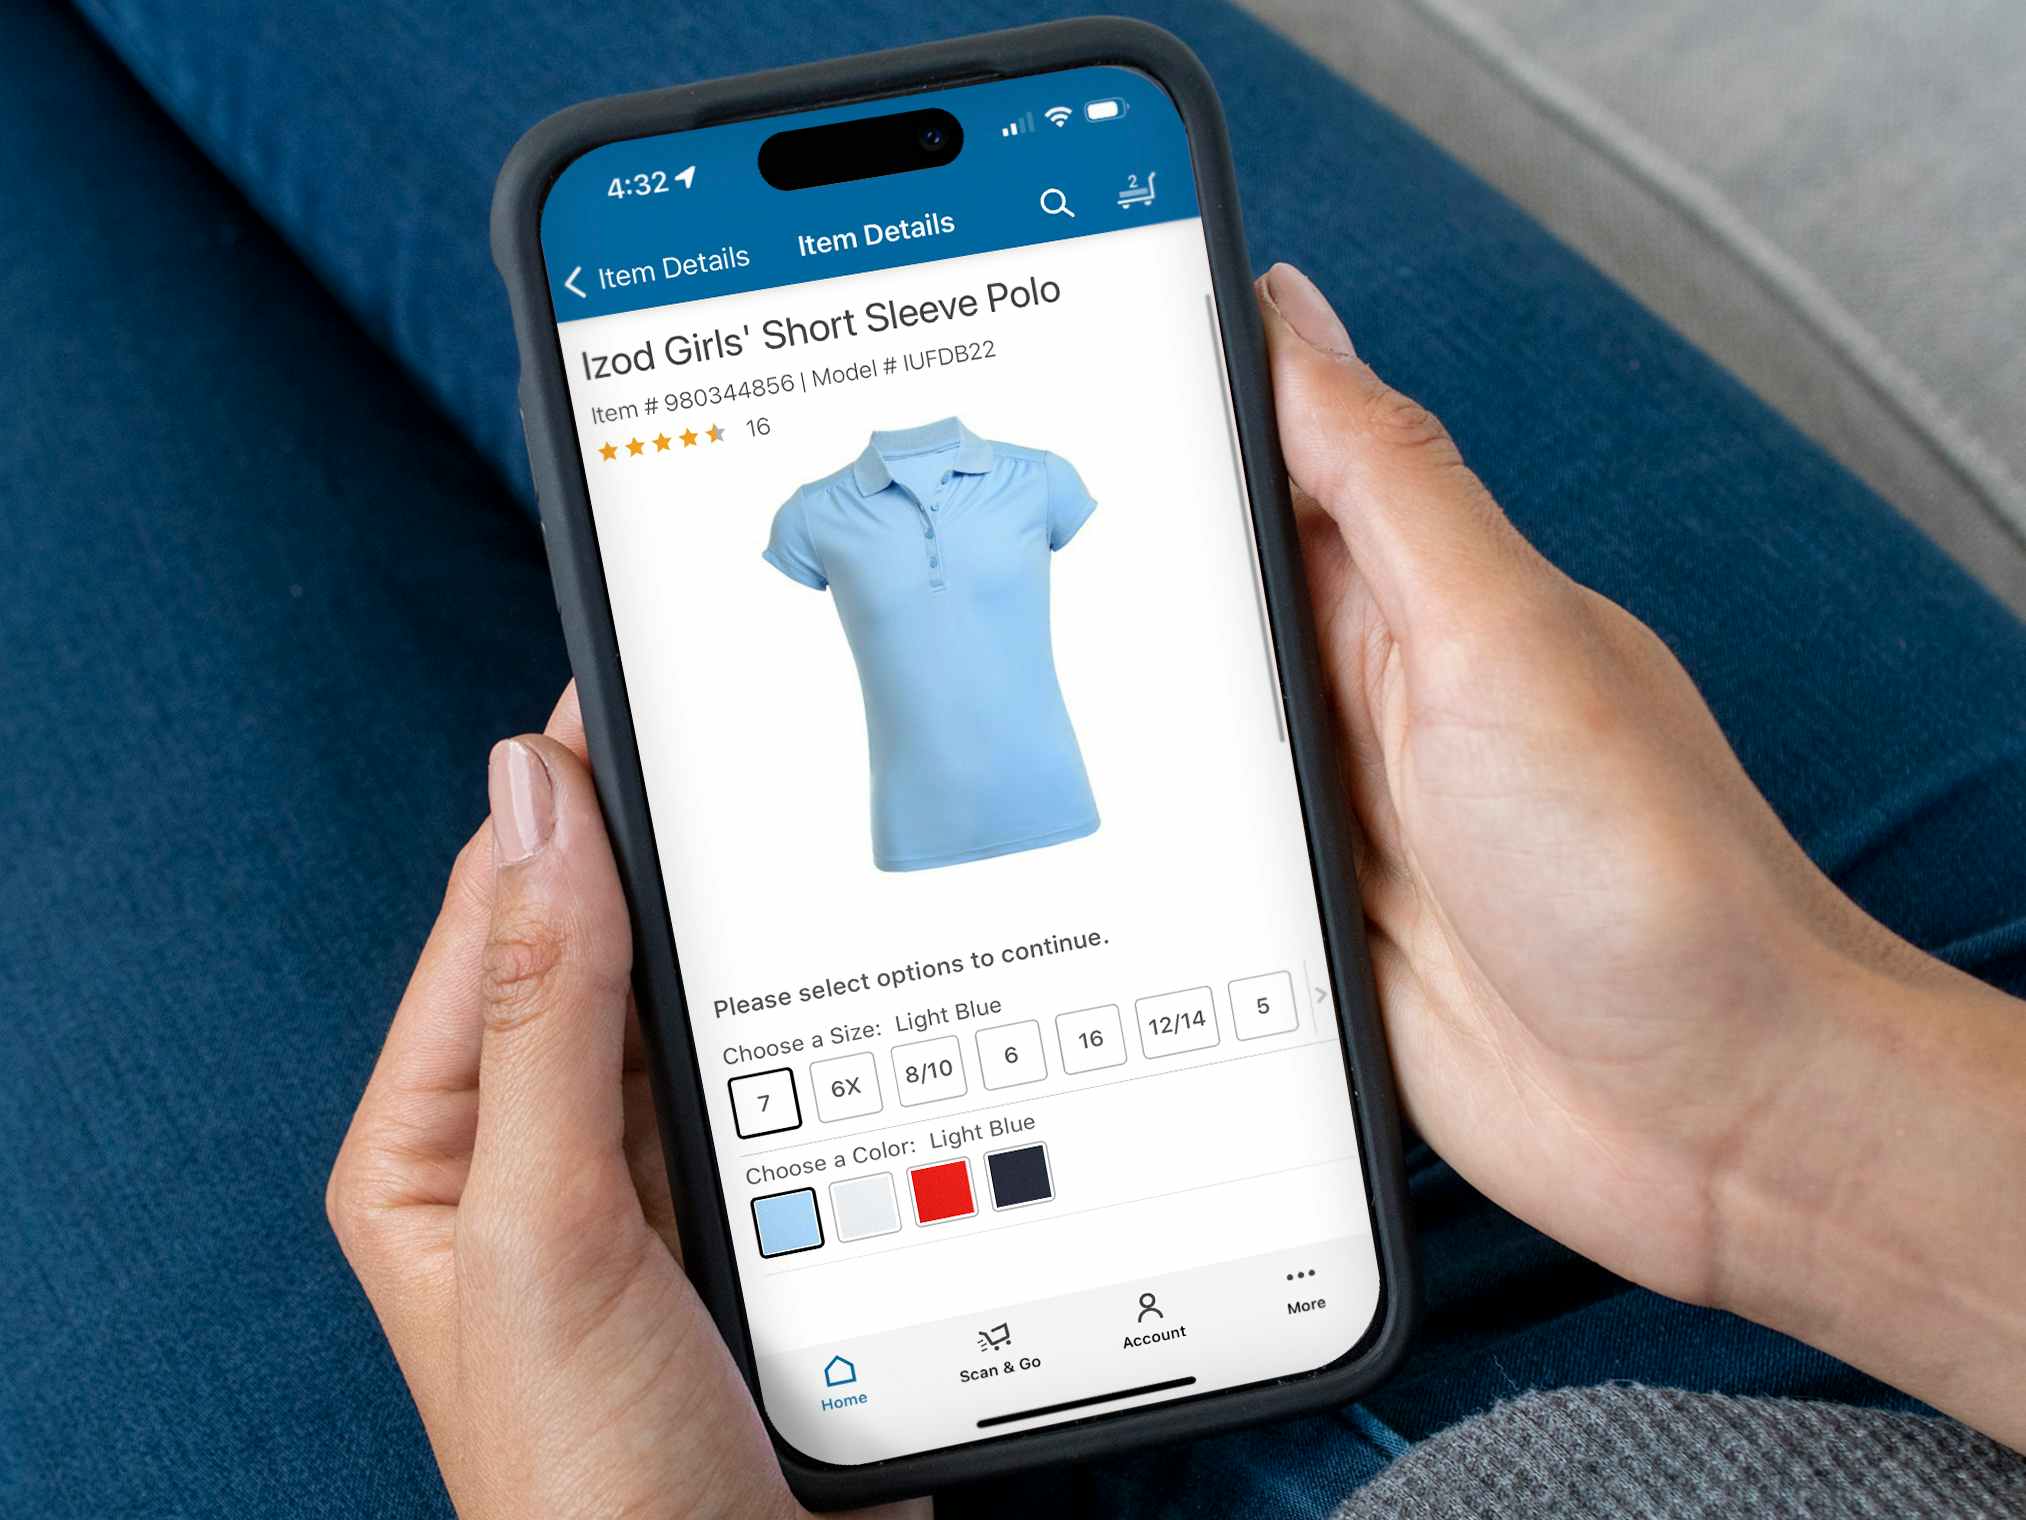 Someone shopping for school uniforms on the Sam's Club app